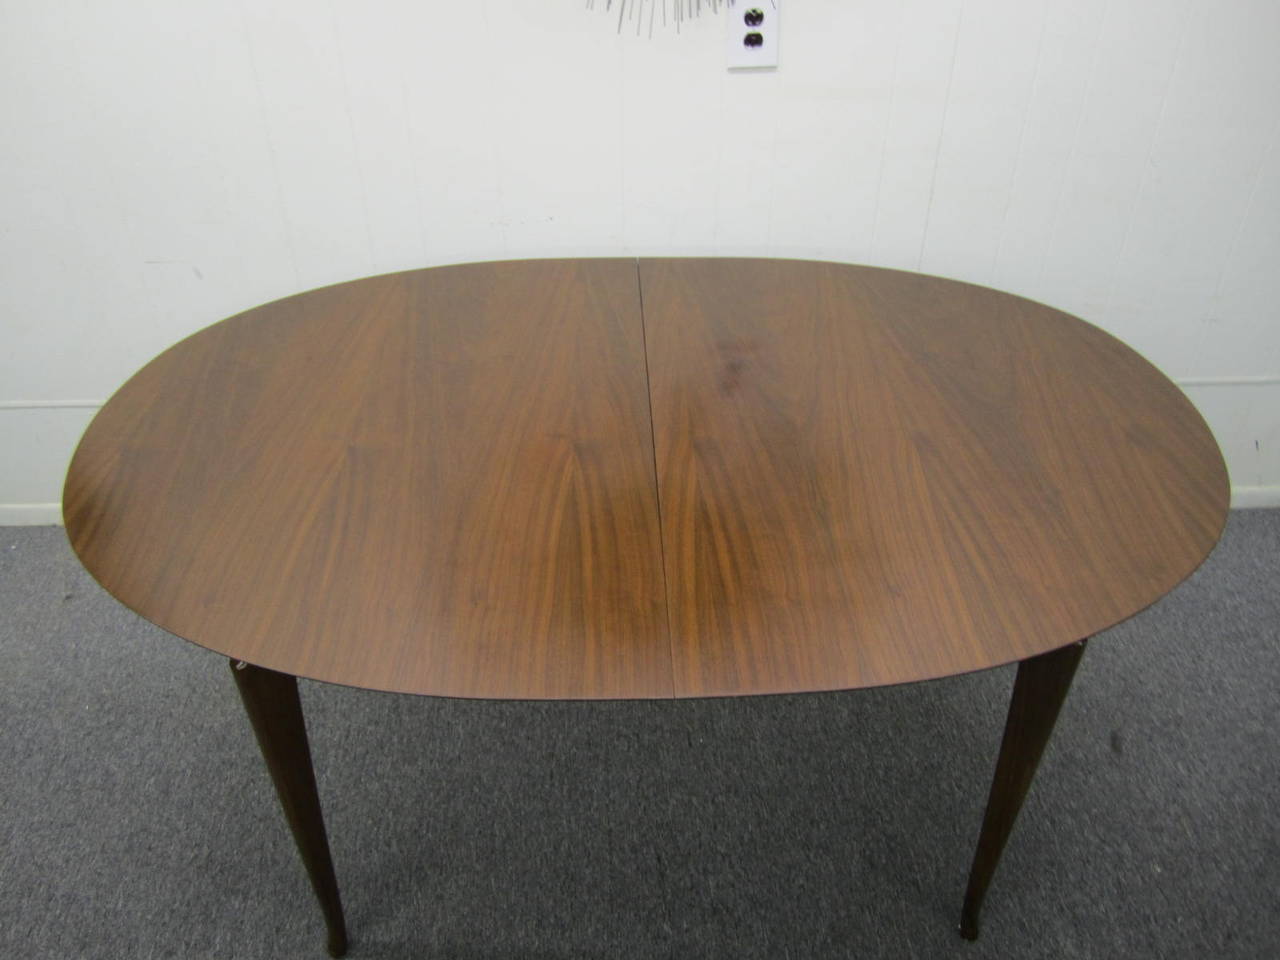 Gorgeous Vladimir Kagan style sculptural walnut dining table with 2 leaves.  Fantastic original condition, the top looks great even with the leaves installed-usually the leaves do not match.  We love the racetrack shape of the top along with the